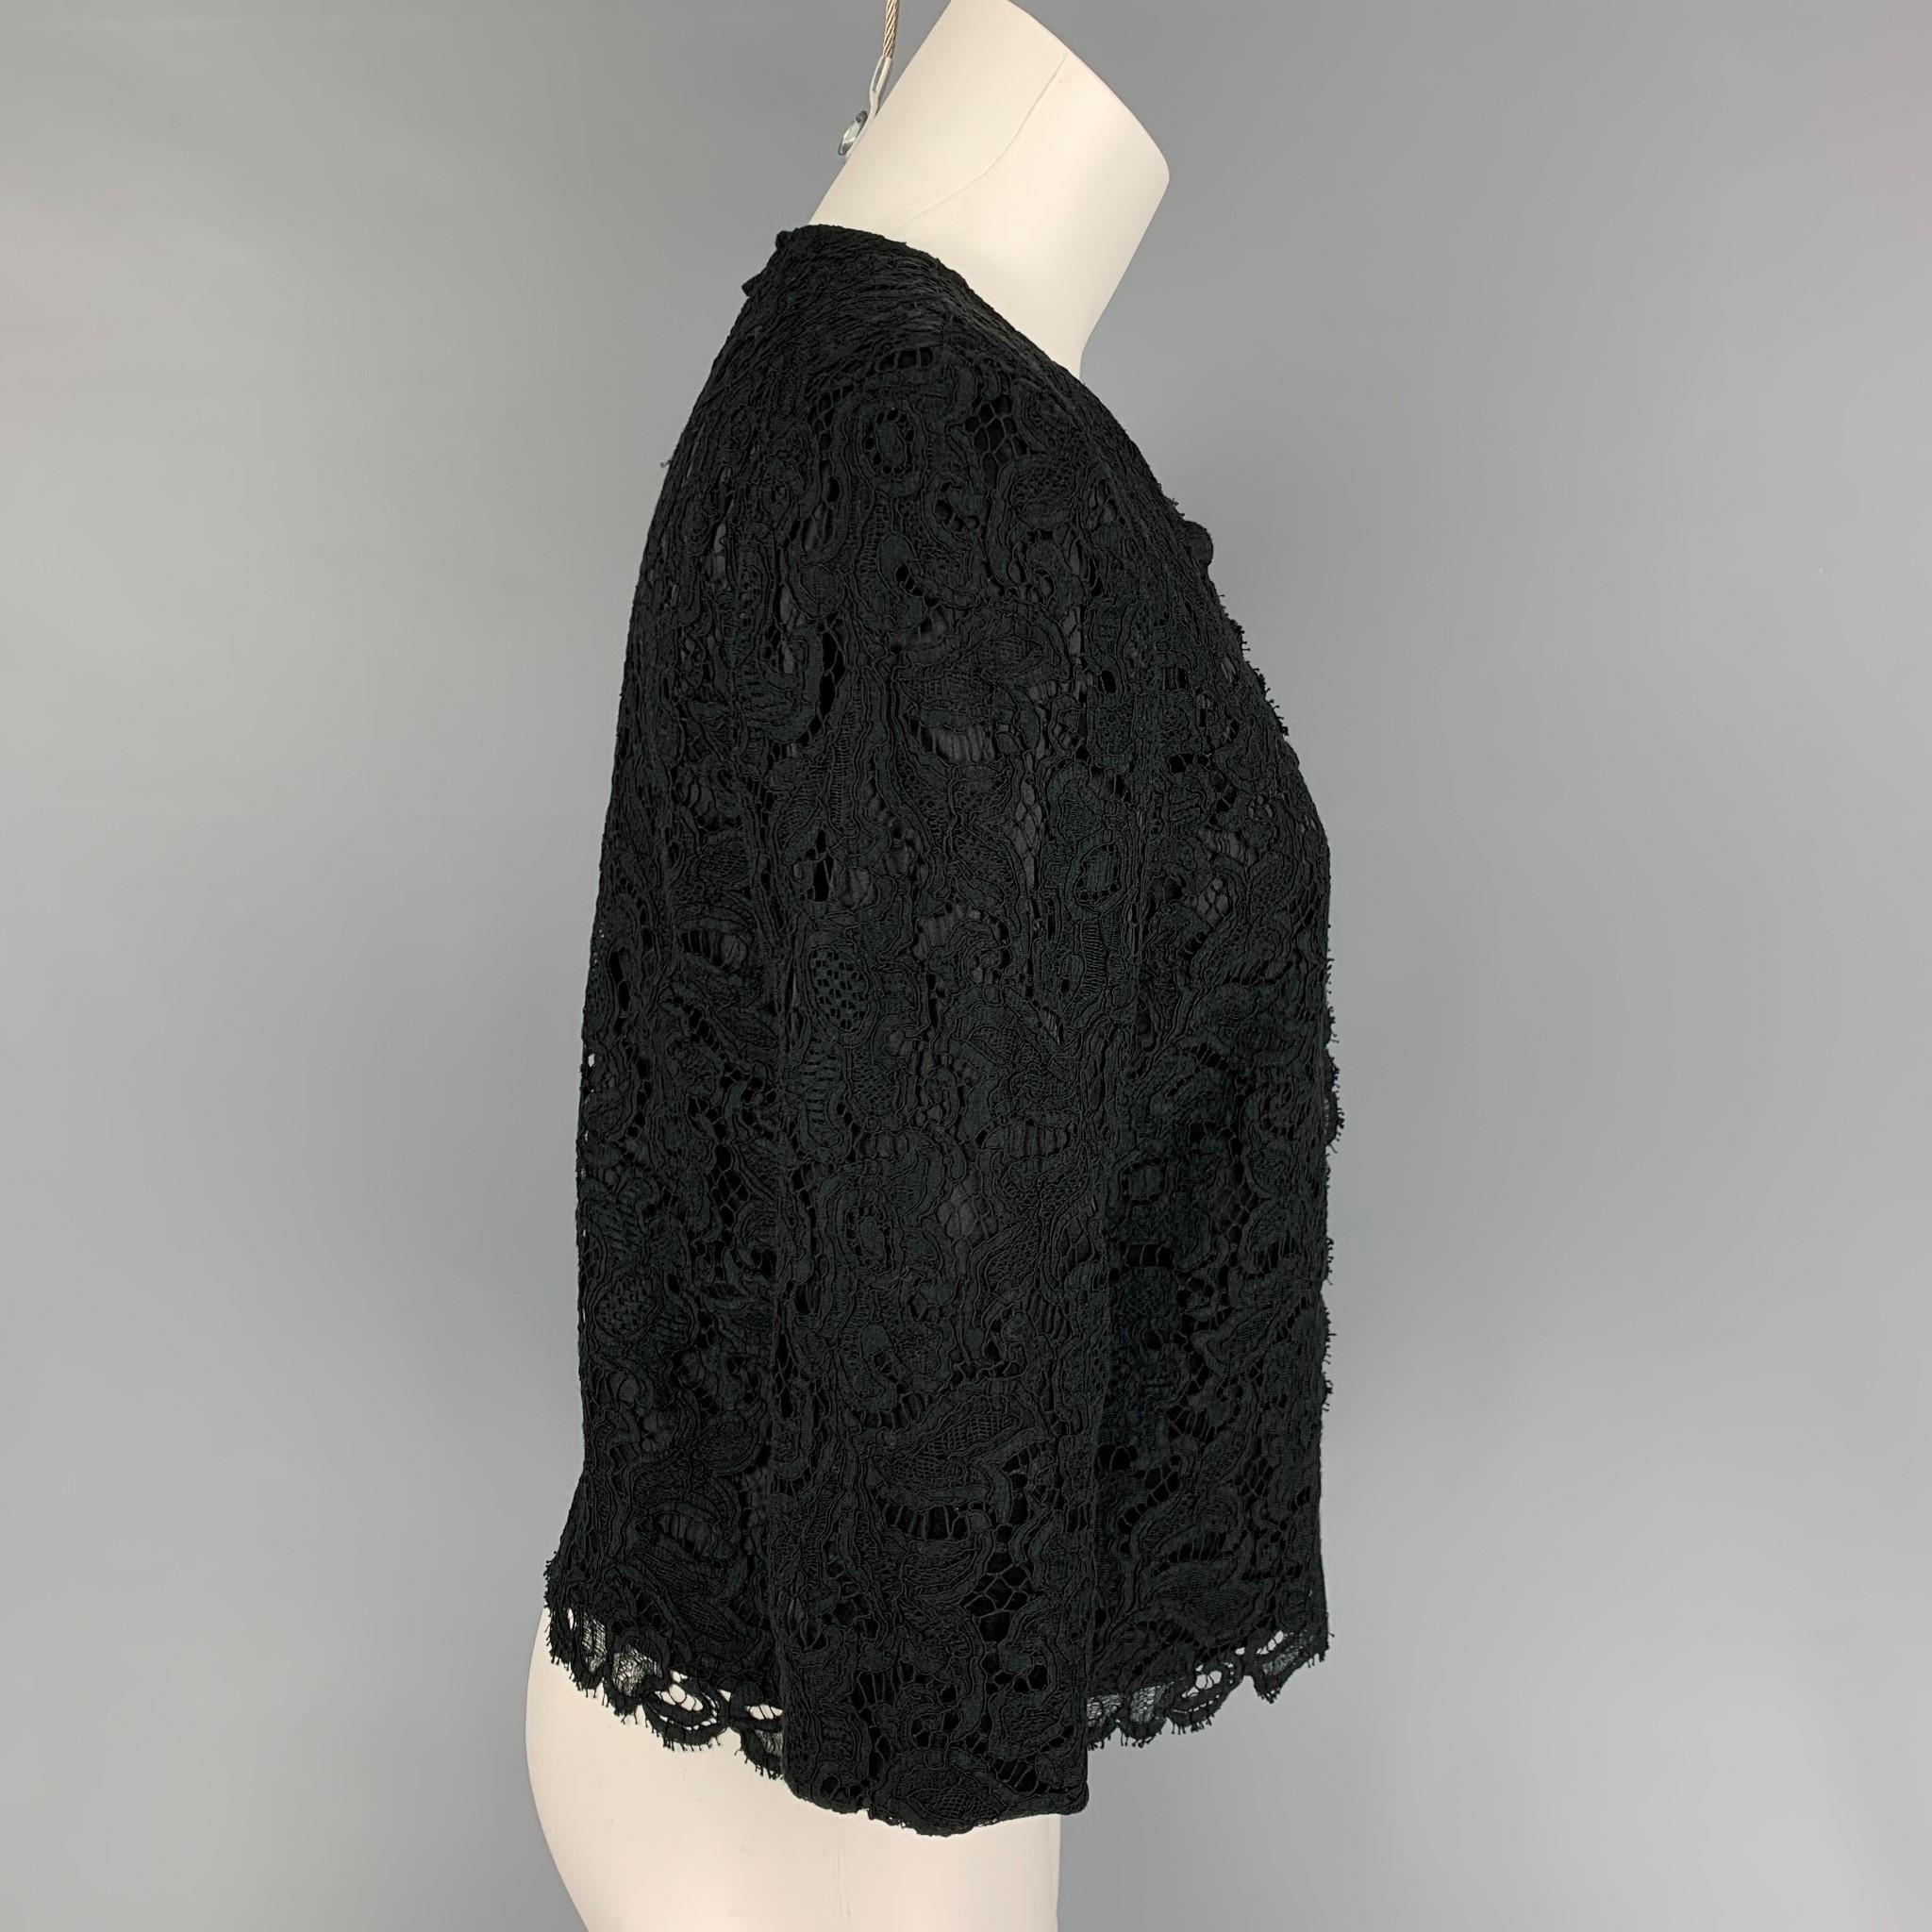 BLACK FLEECE jacket comes in a black lace cotton blend featuring a cropped style and a buttoned closure. 

Very Good Pre-Owned Condition.
Marked: BB2

Measurements:

Shoulder: 15 in.
Bust: 34 in.
Sleeve: 16.5 in.
Length: 20 in. 